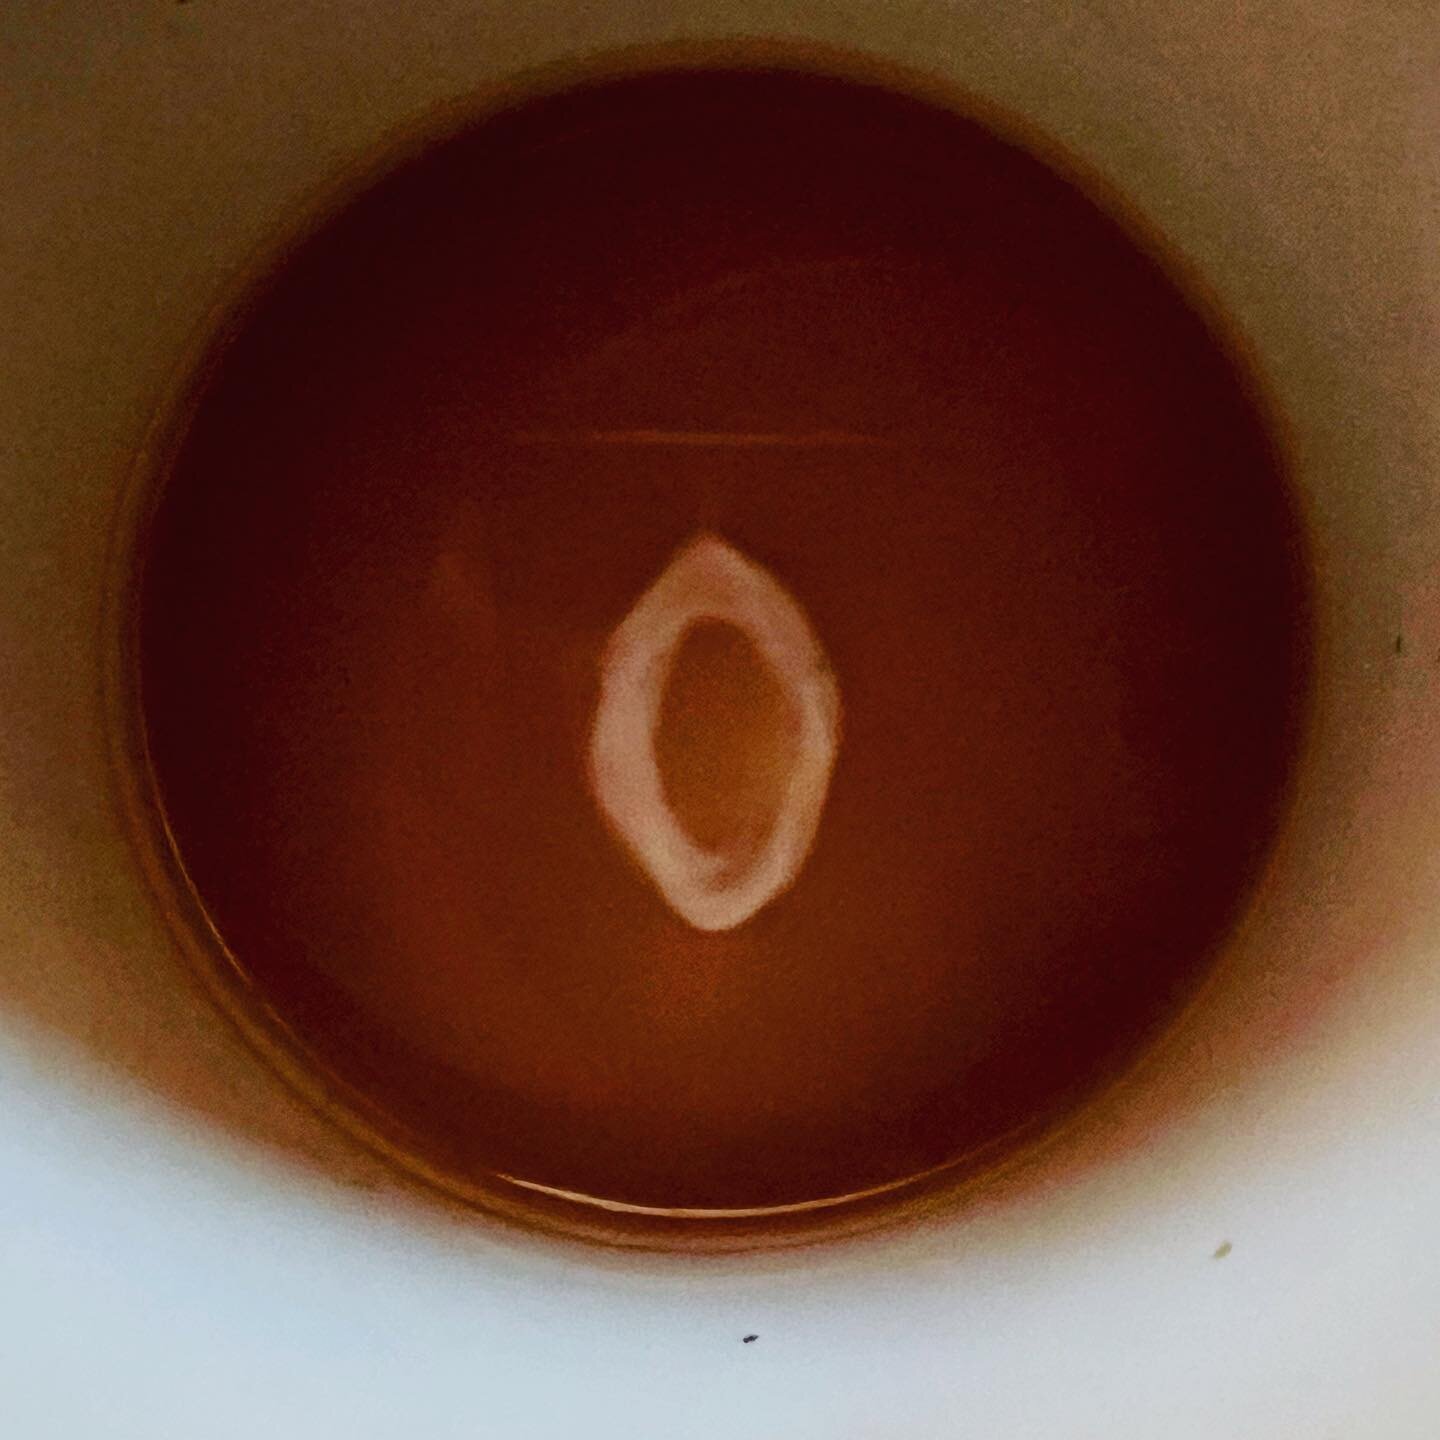 Overnight, a portal has opened in the coffee cup. 

#highartinlowplaces #decaynation #cloudsinmycoffee #coffeelover 
#patternobserver #smallthingscoffee